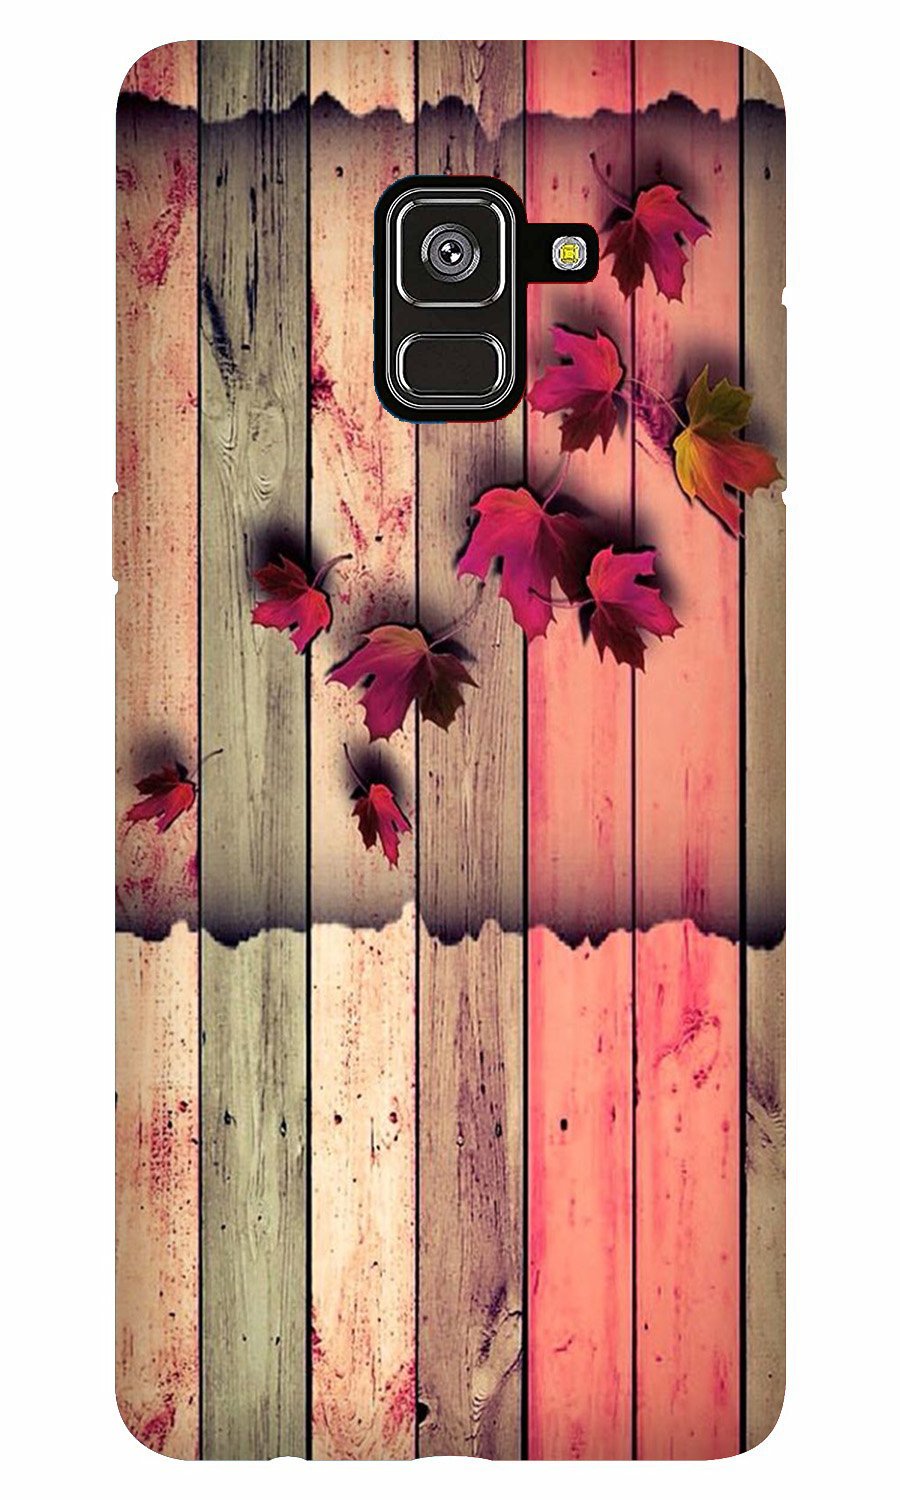 Wooden look2 Case for Galaxy A5 (2018)